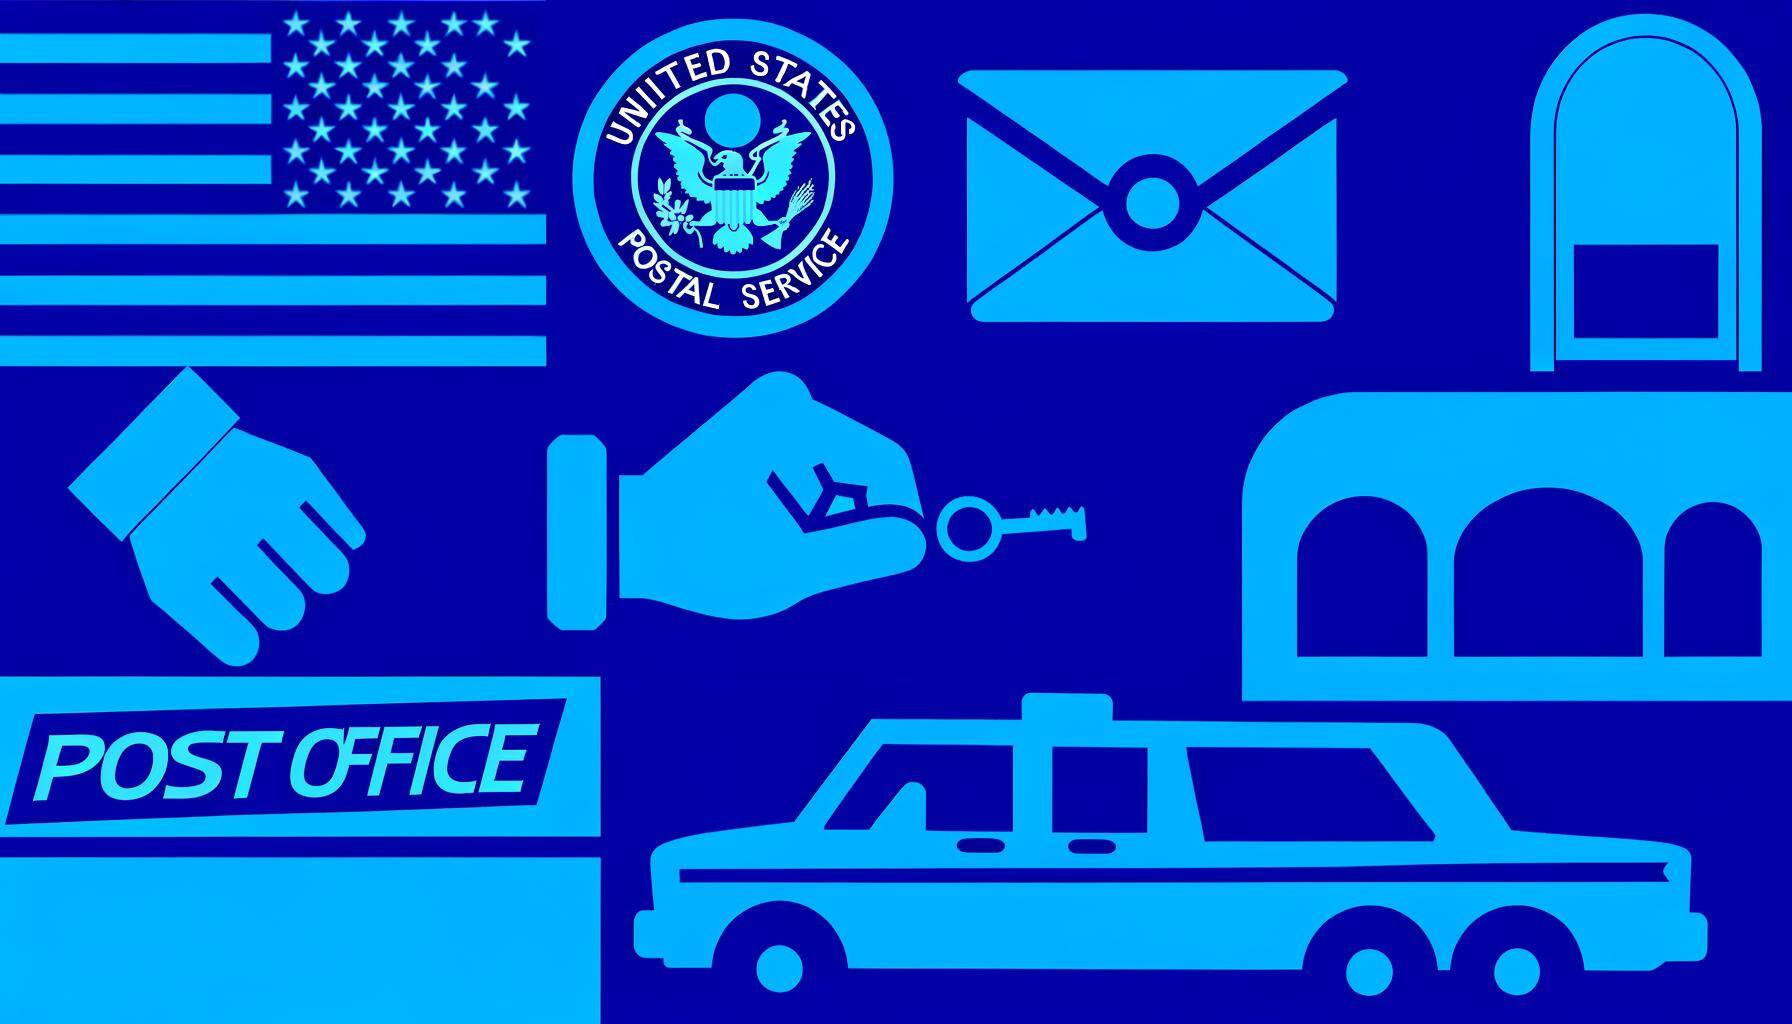 Strong US post office blue tones